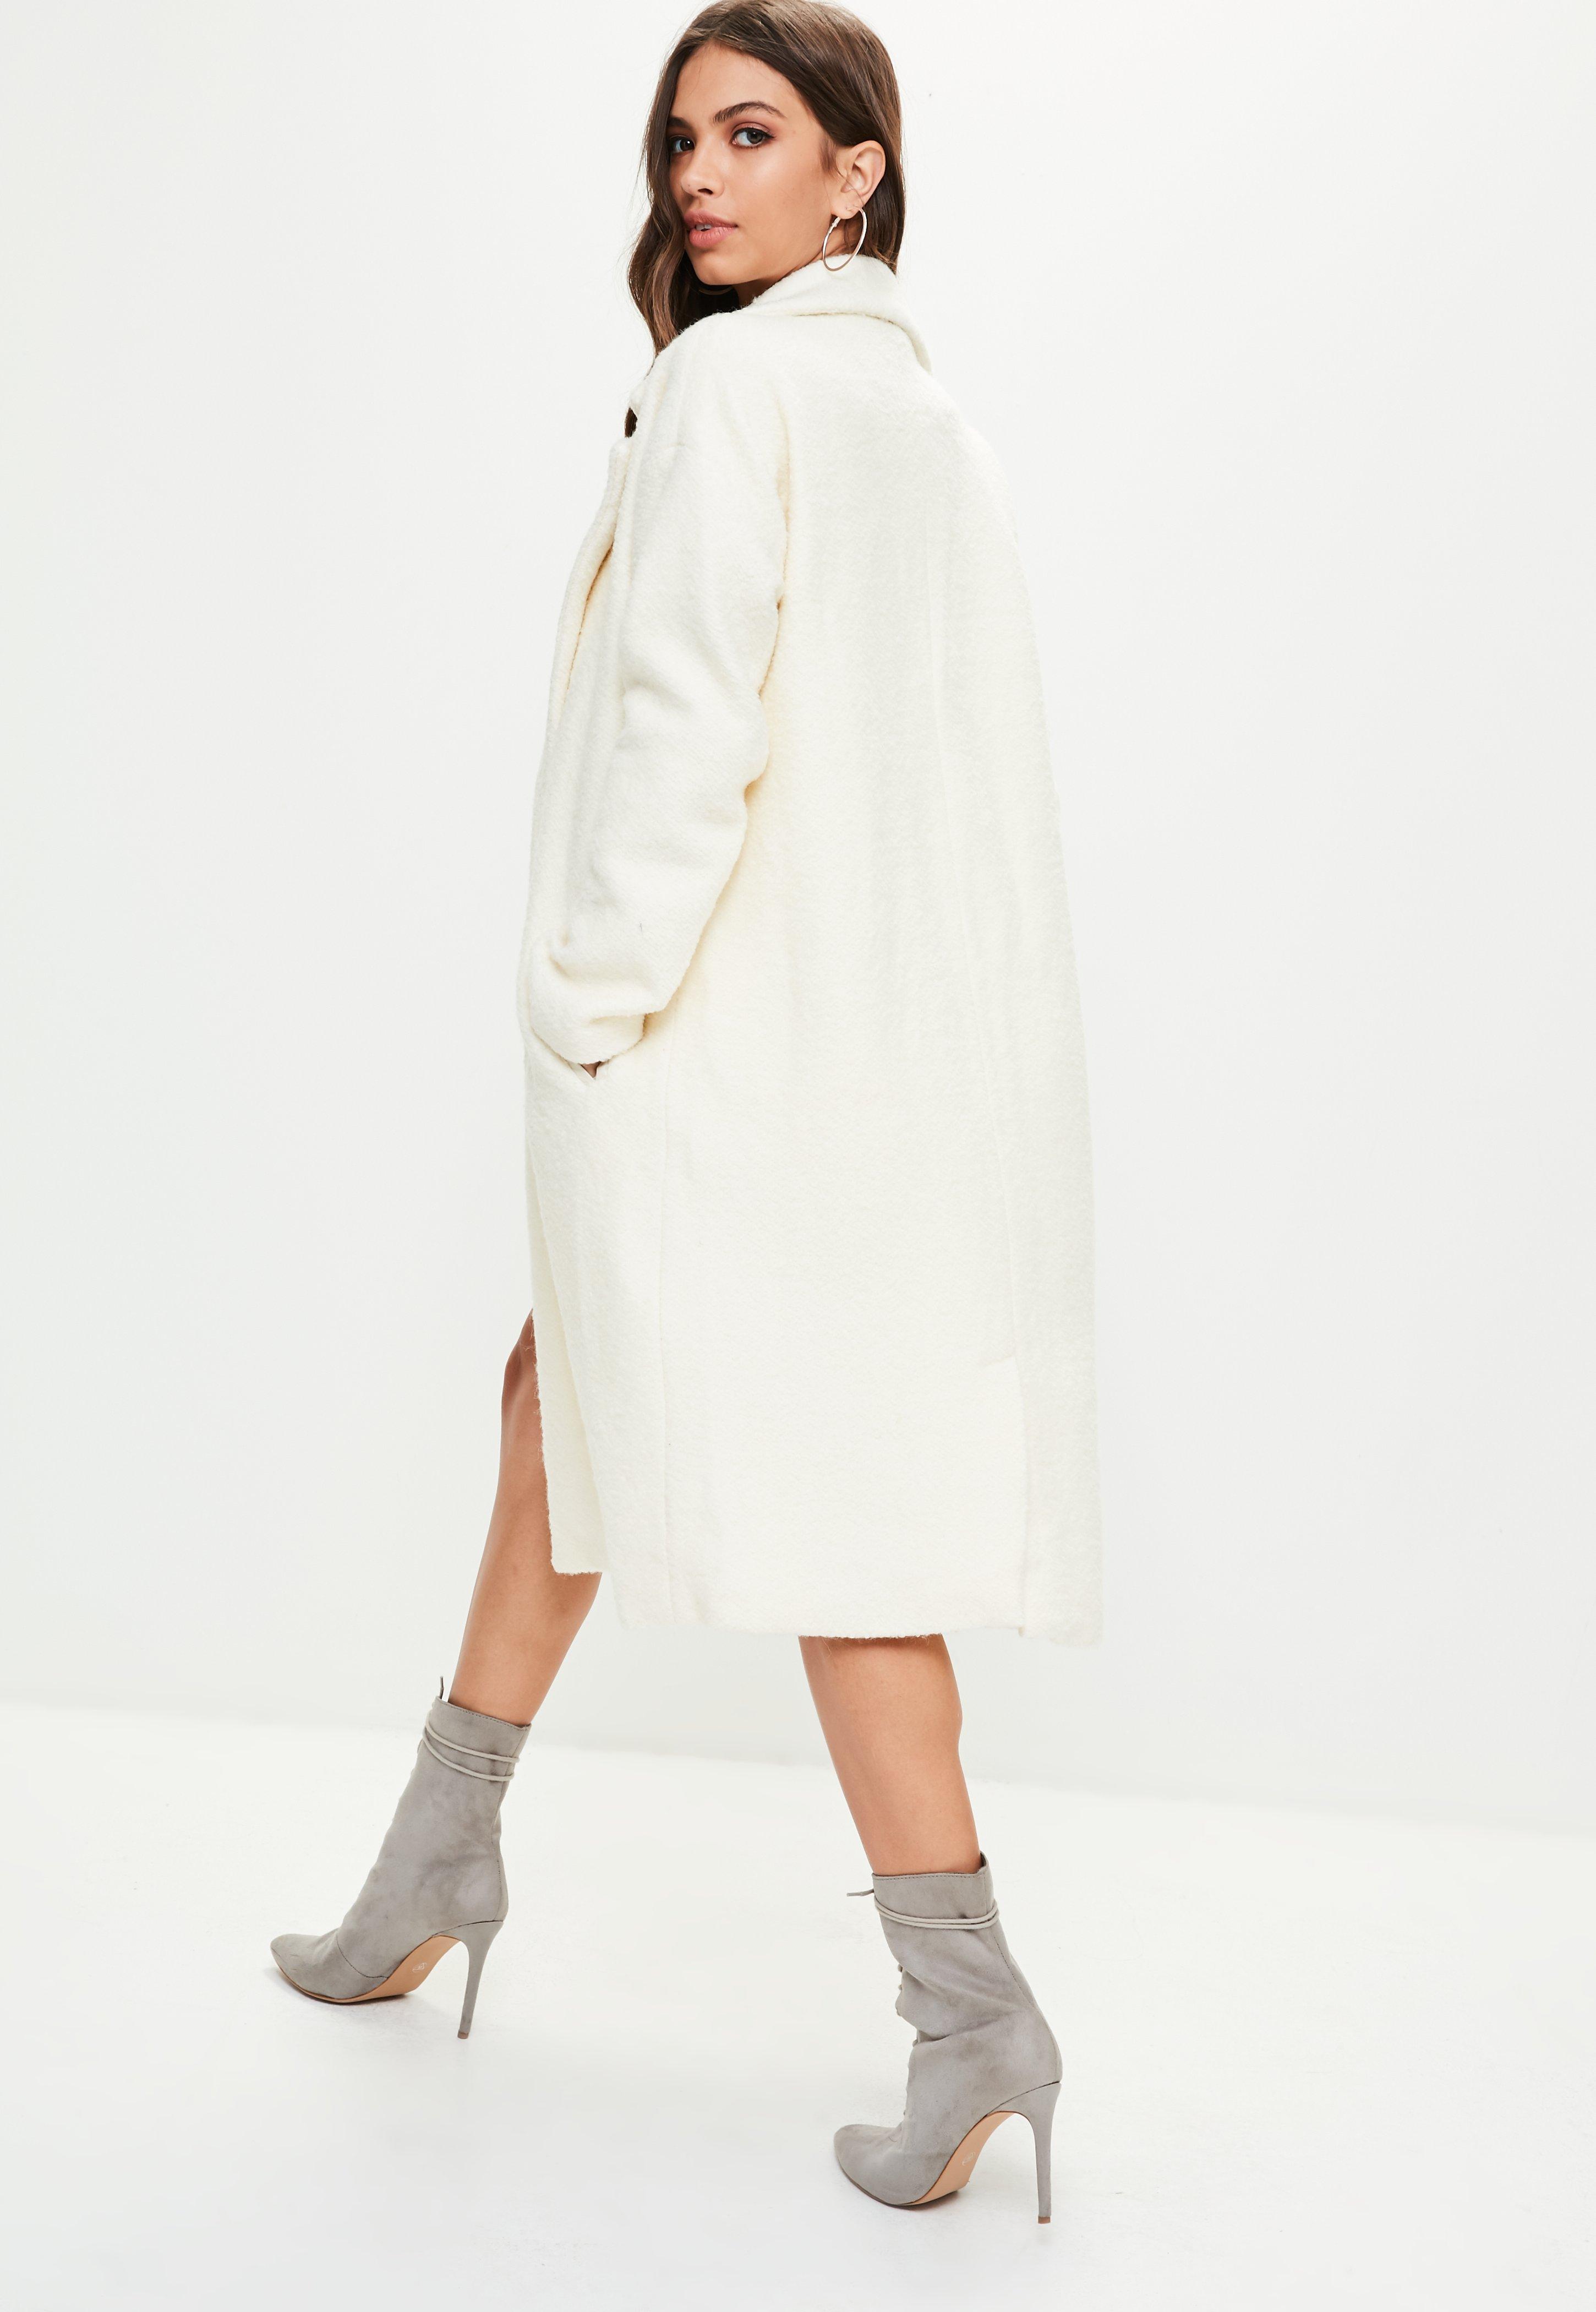 Lyst - Missguided Cream Wool Coat in Natural